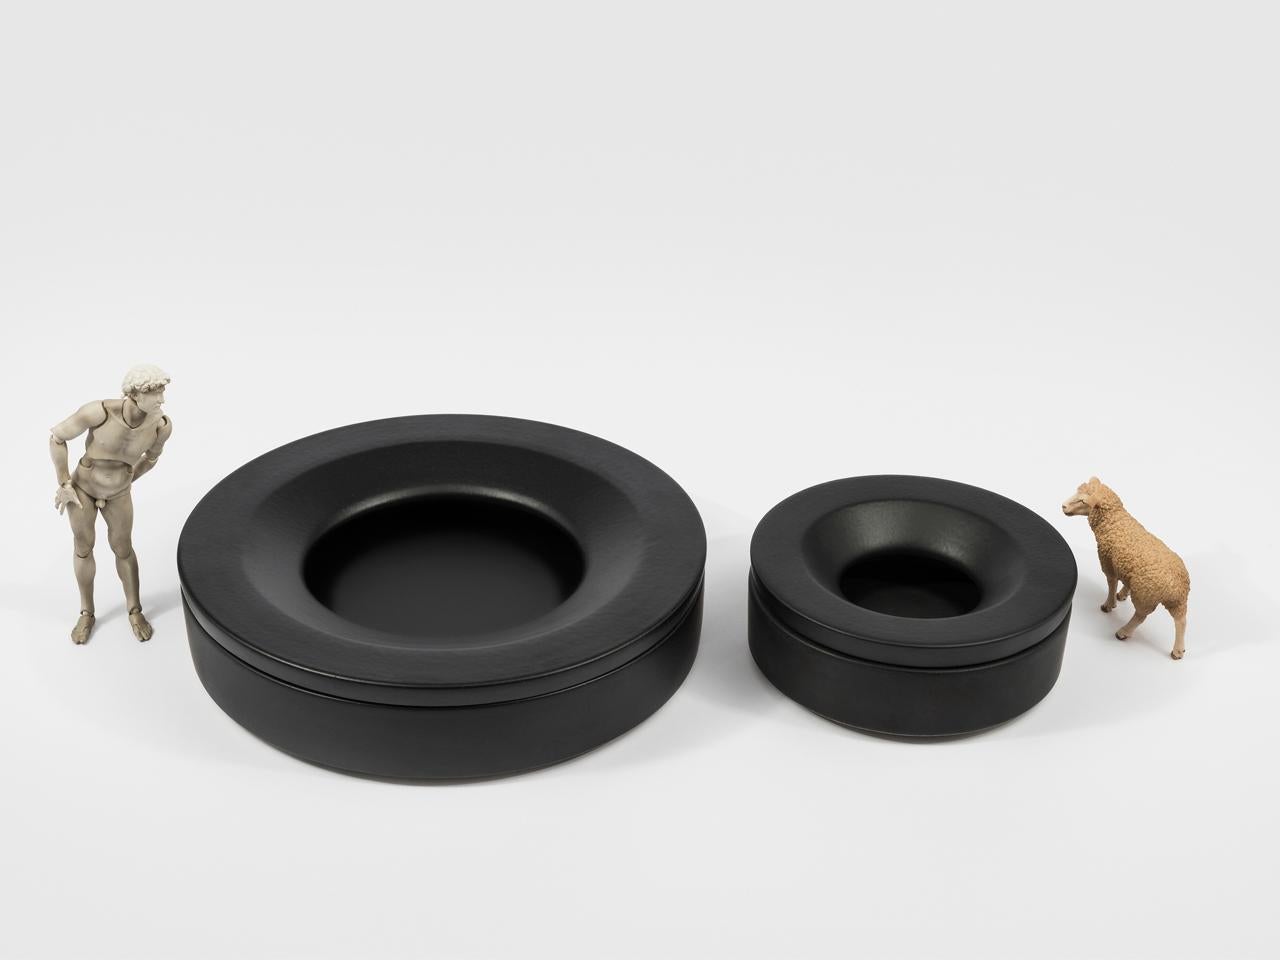 Small Black Barbados is a glazed ceramic ashtray made up of two parts: a circular base and a ring shaped lid that fits on top and hides part of the contents. The simple, pure geometry of the design give Barbados a distinctive aura that almost turns